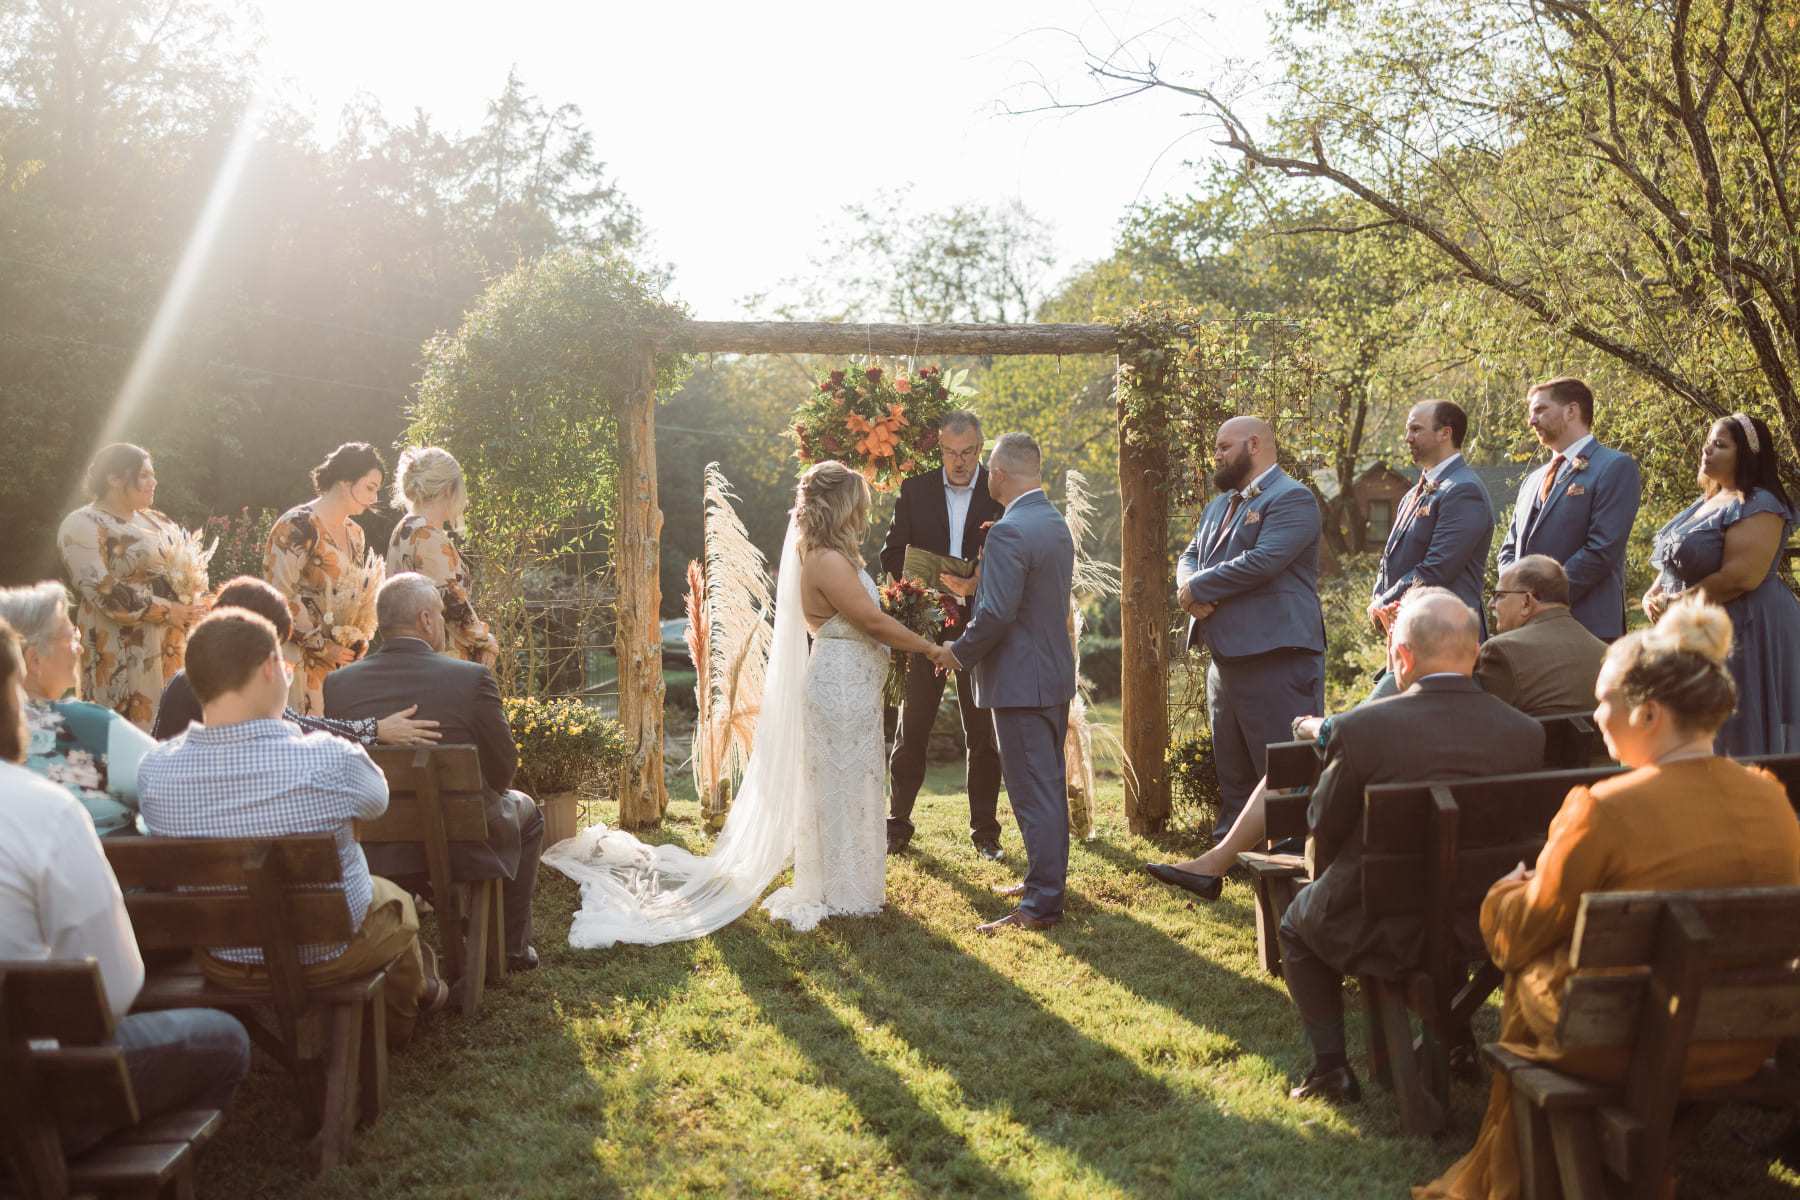 Outdoor ceremony at arch